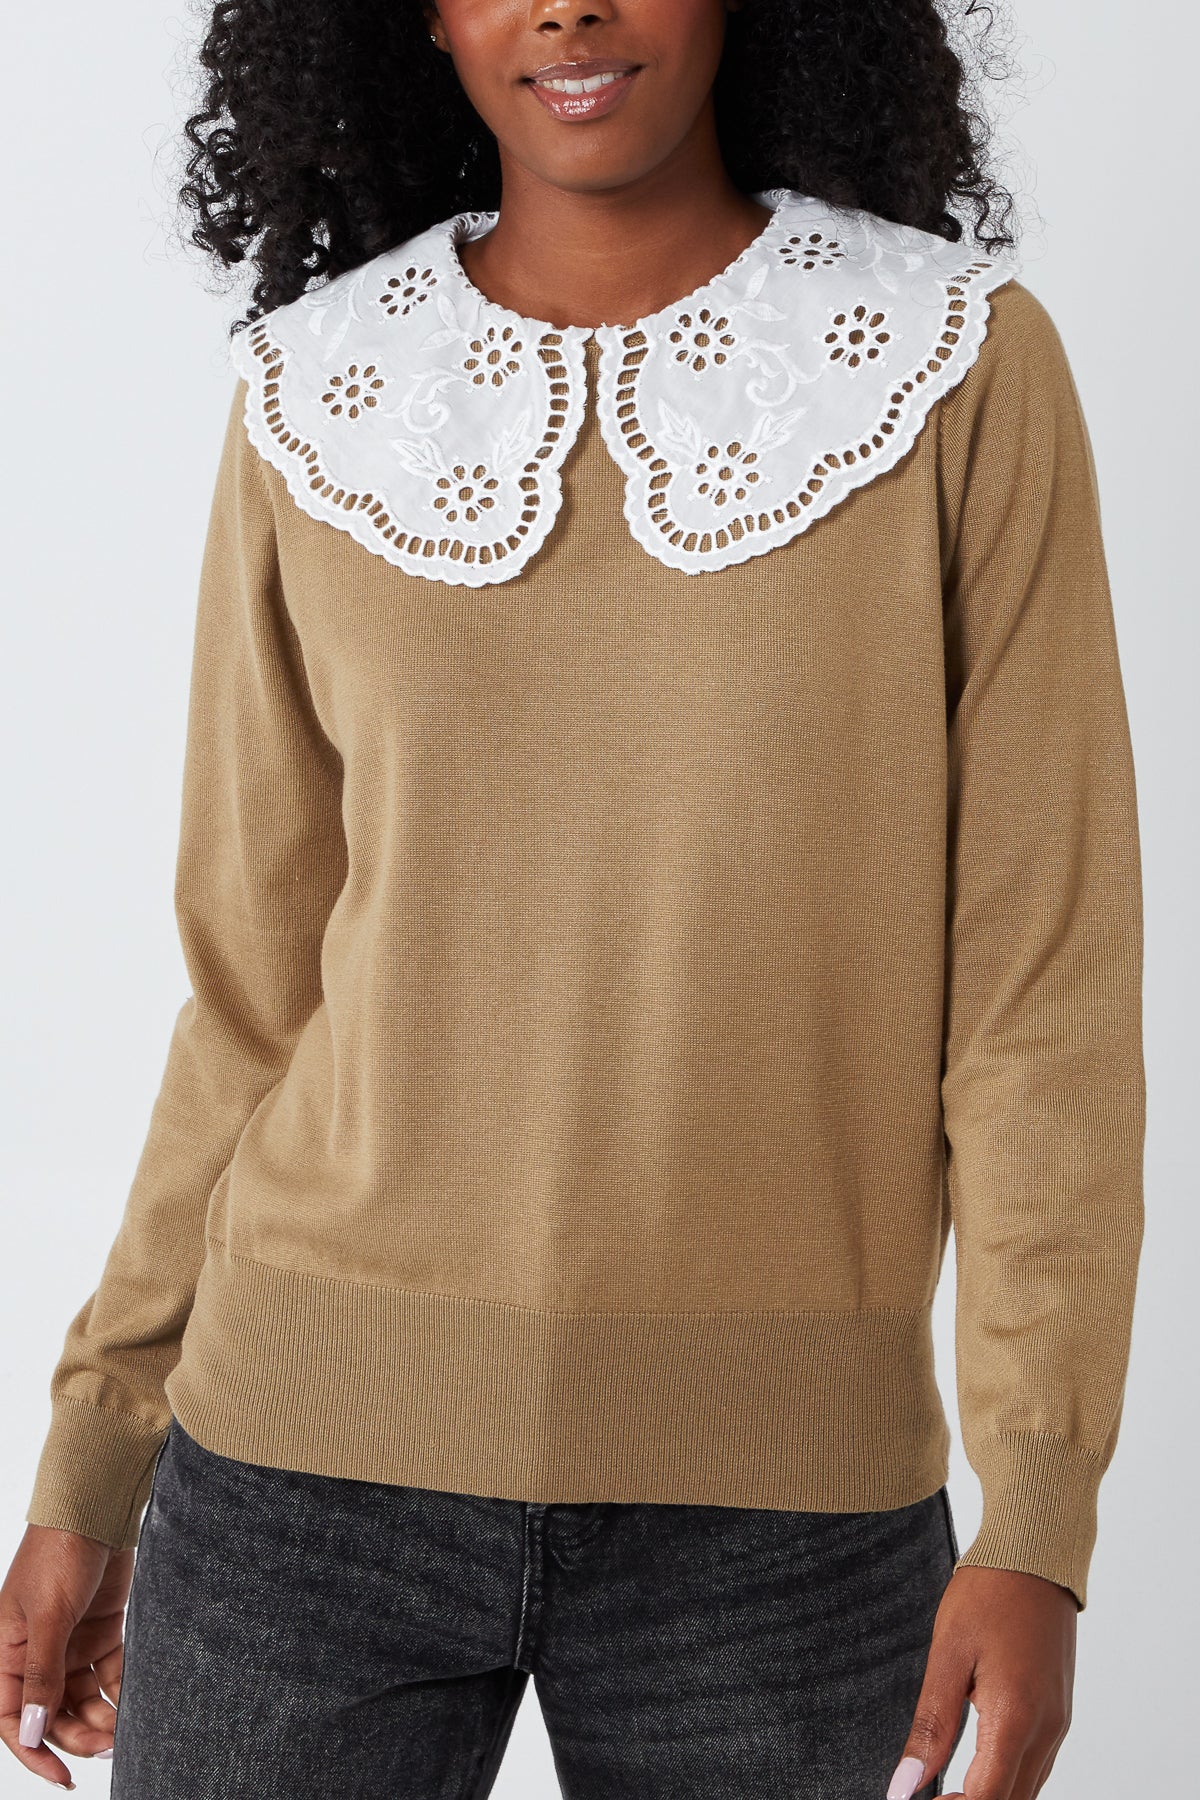 Lace Collar Pullover Jumper